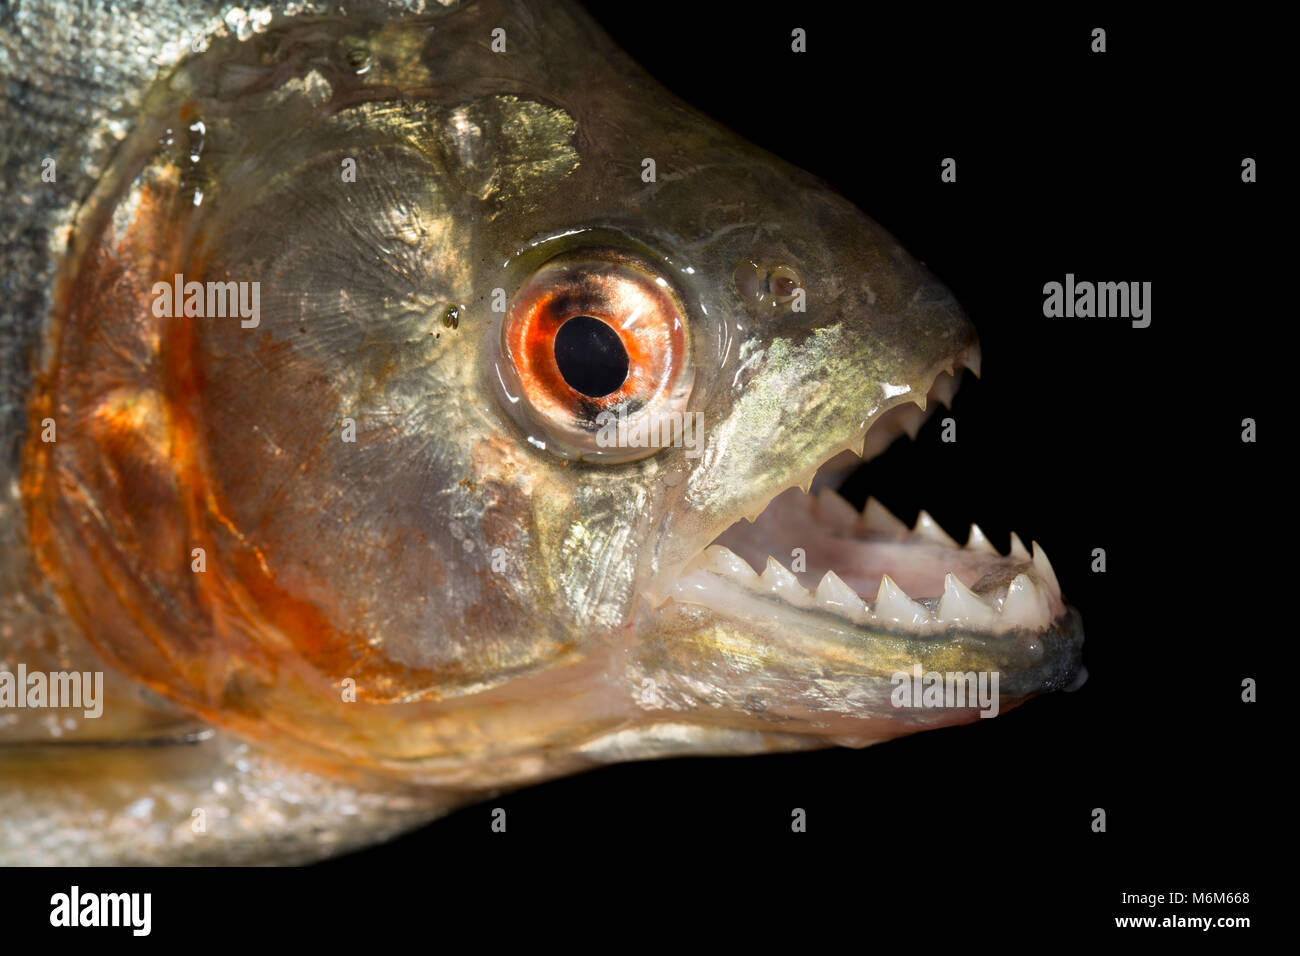 A red bellied piranha fish-there are several types-caught fishing with bait from the Coppename River, Suriname, South America Stock Photo